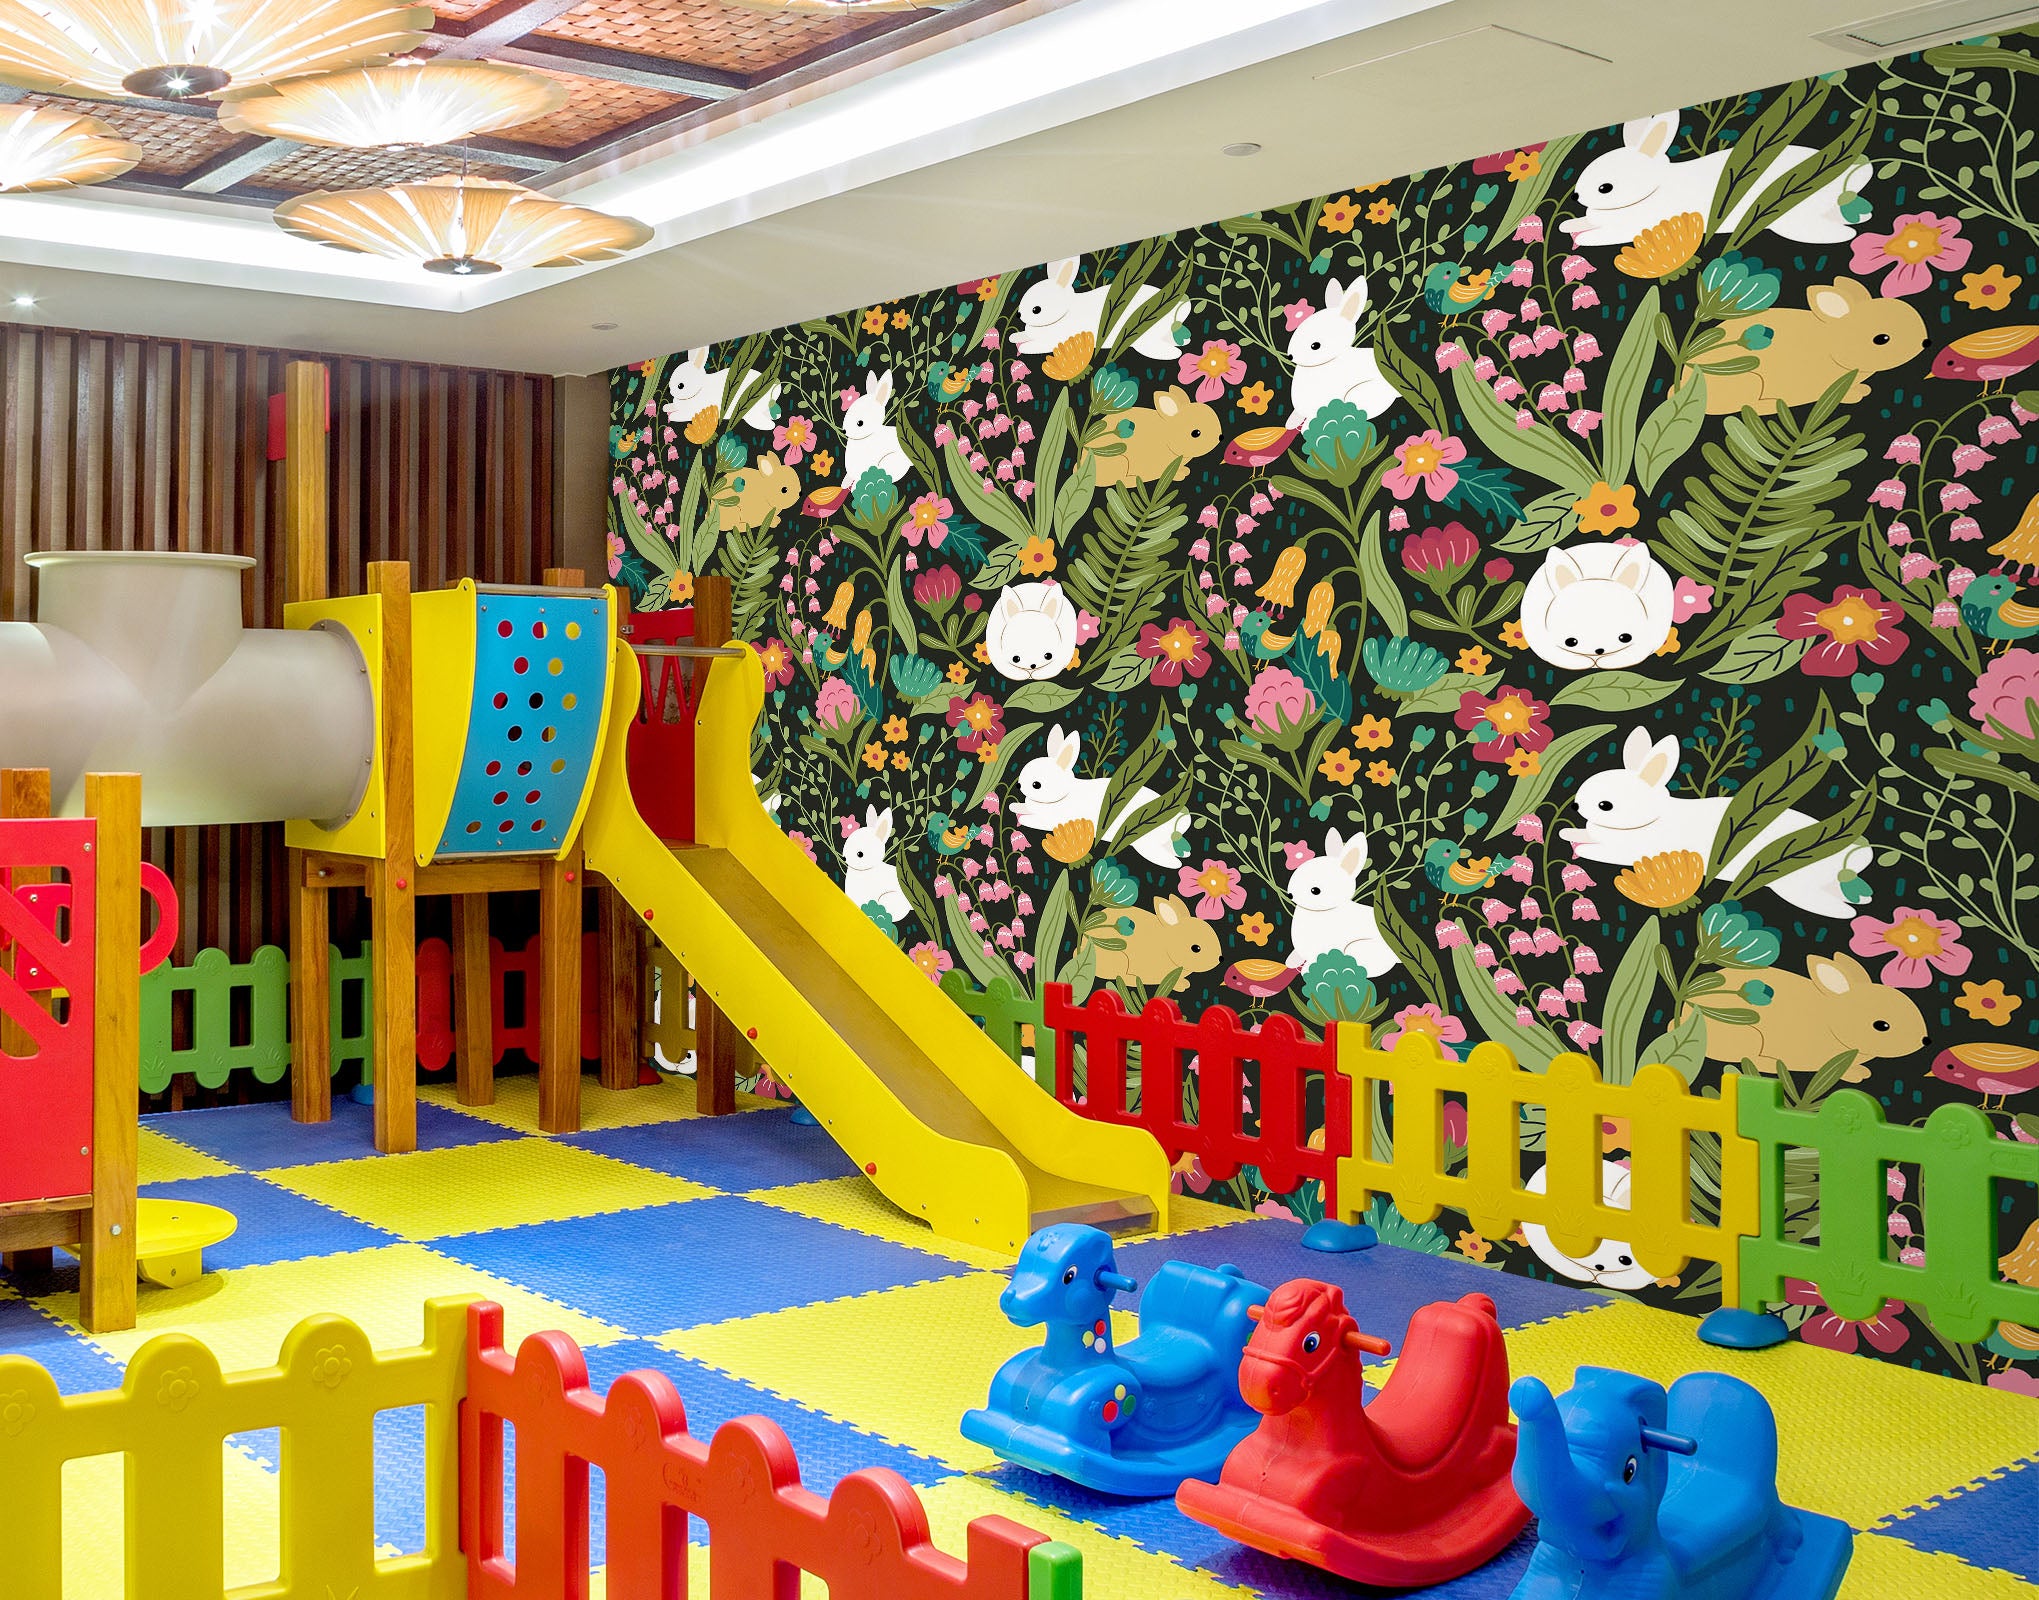 3D Flowers White Rabbit 1427 Indoor Play Centres Wall Murals